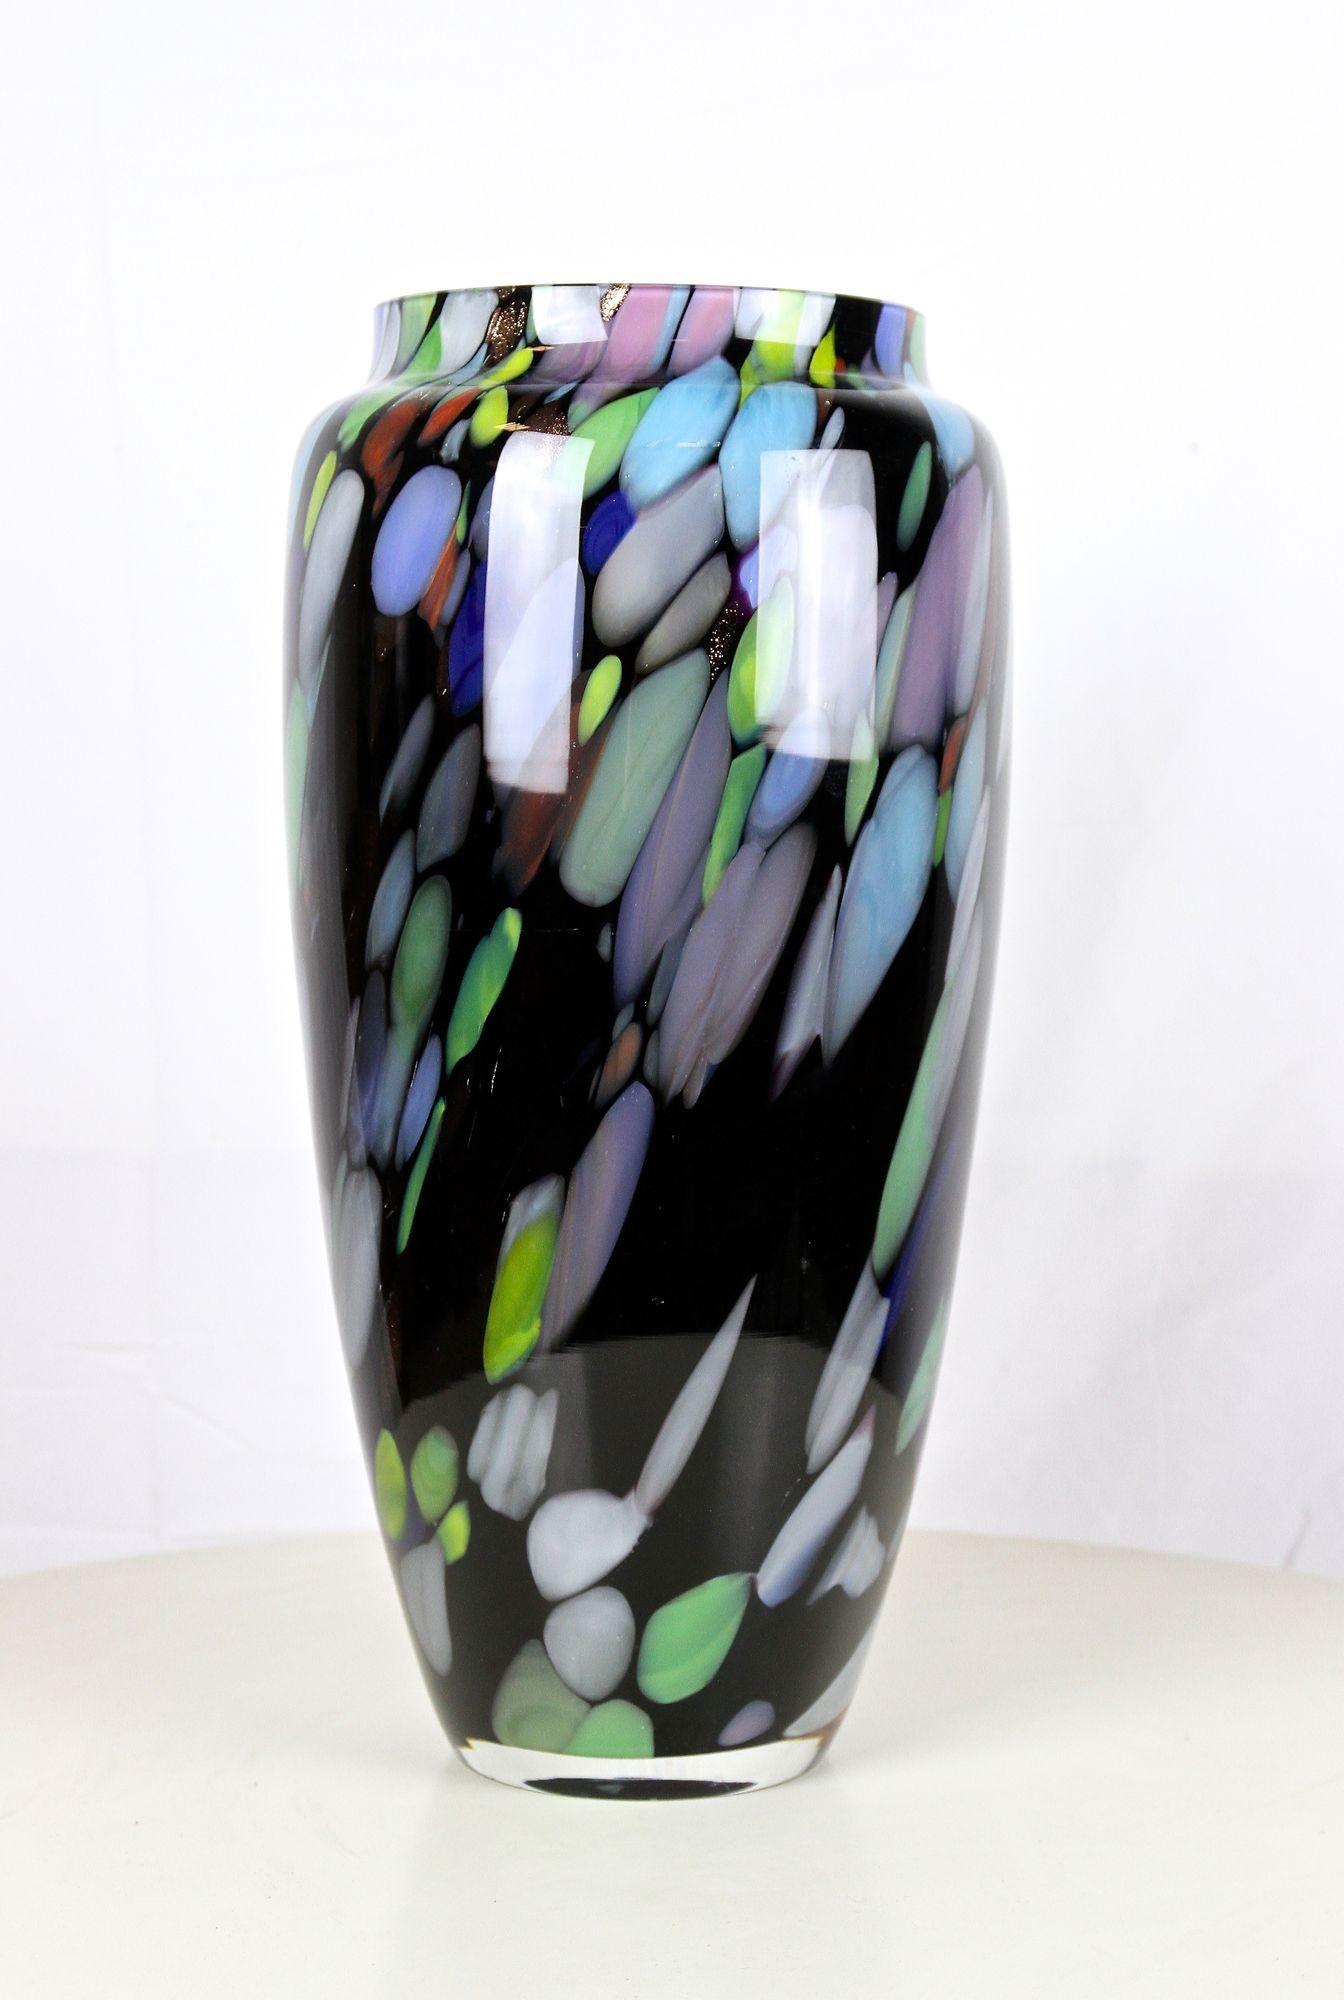 Mid-Century Modern 20th Century Murano Glass Vase With Spots Of Colors, Italy circa 1975 For Sale